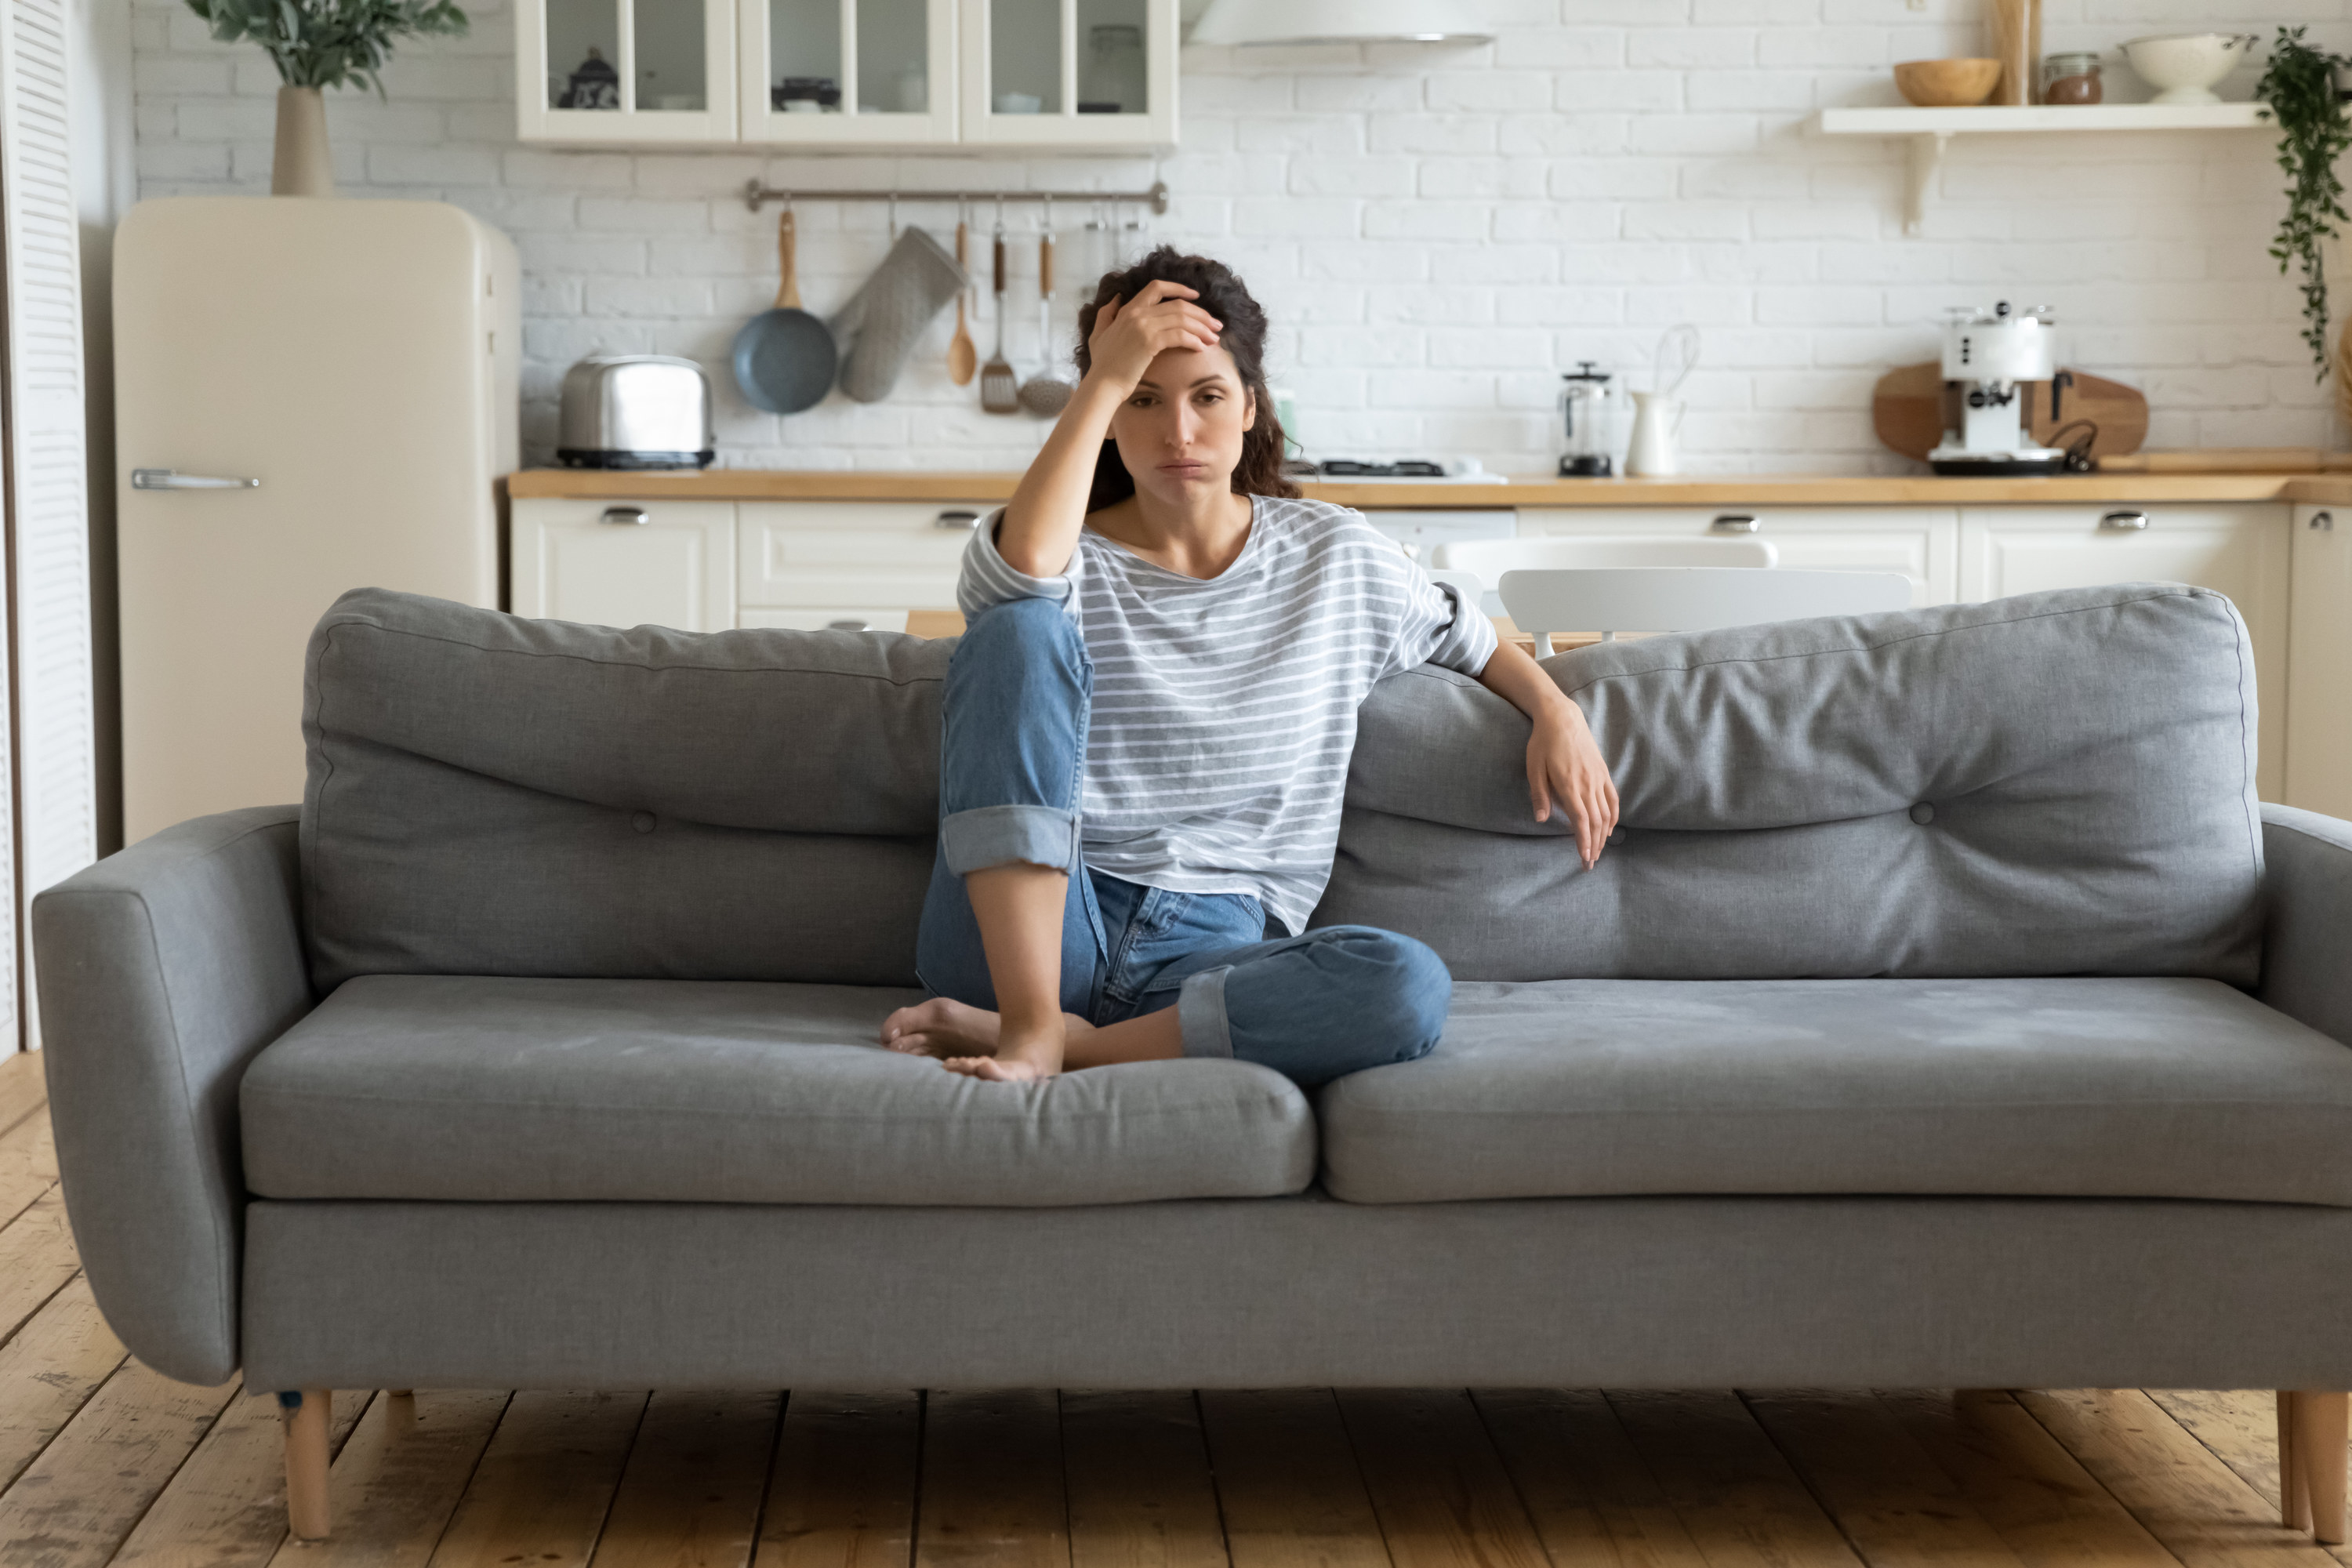 A woman looking stressed while sitting on her couch with her hand to her head